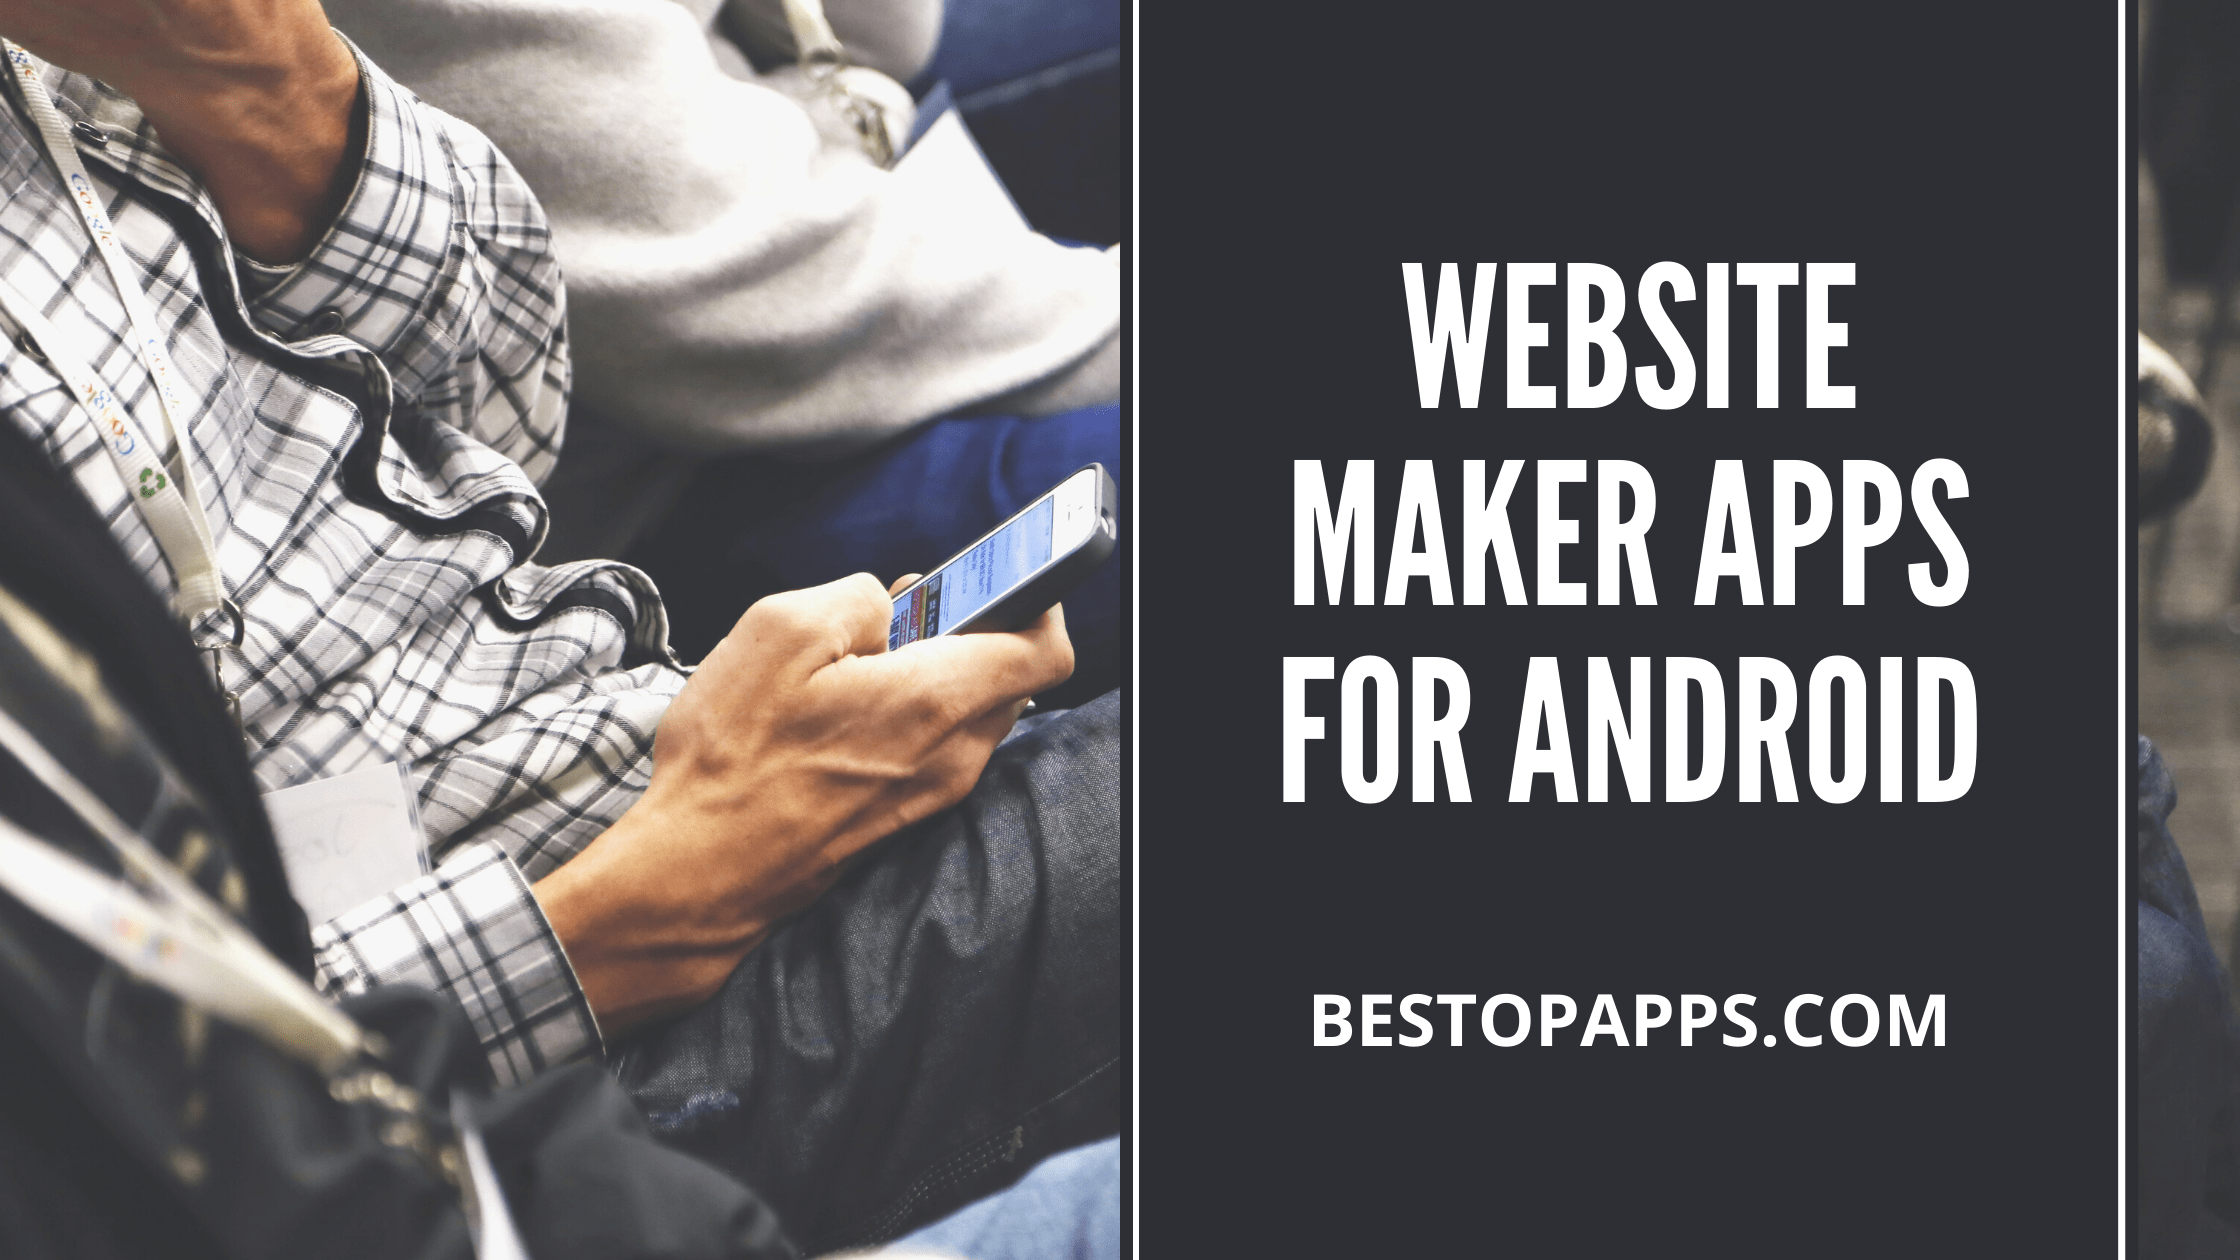 Website Maker Apps for Android